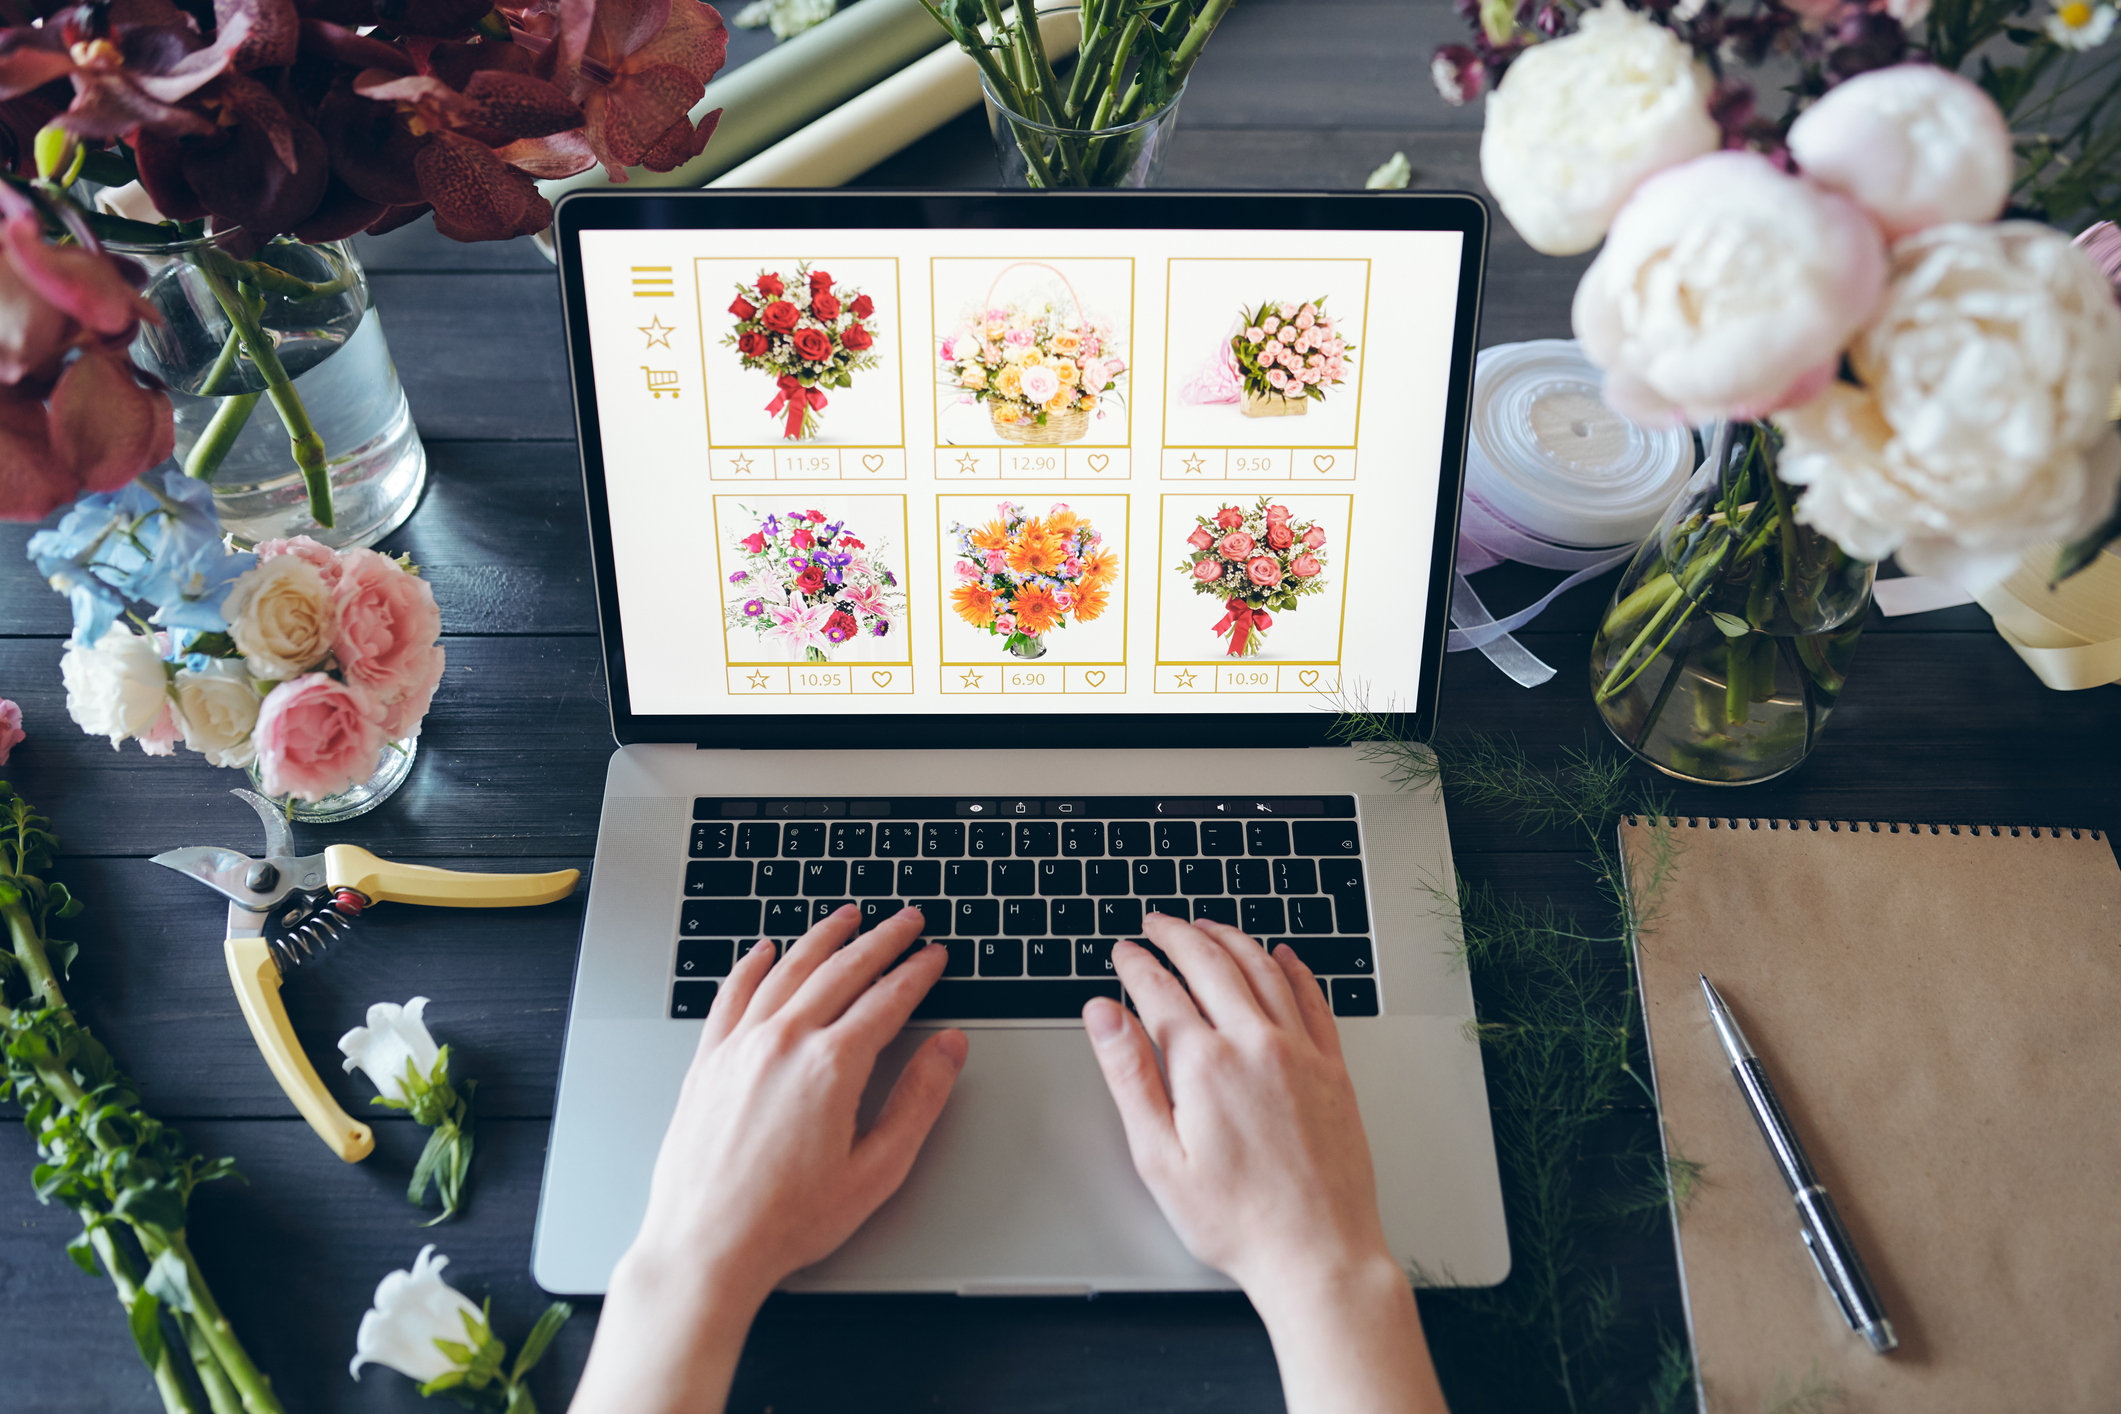 cybersecurity tips for online shopping mother's day blog post